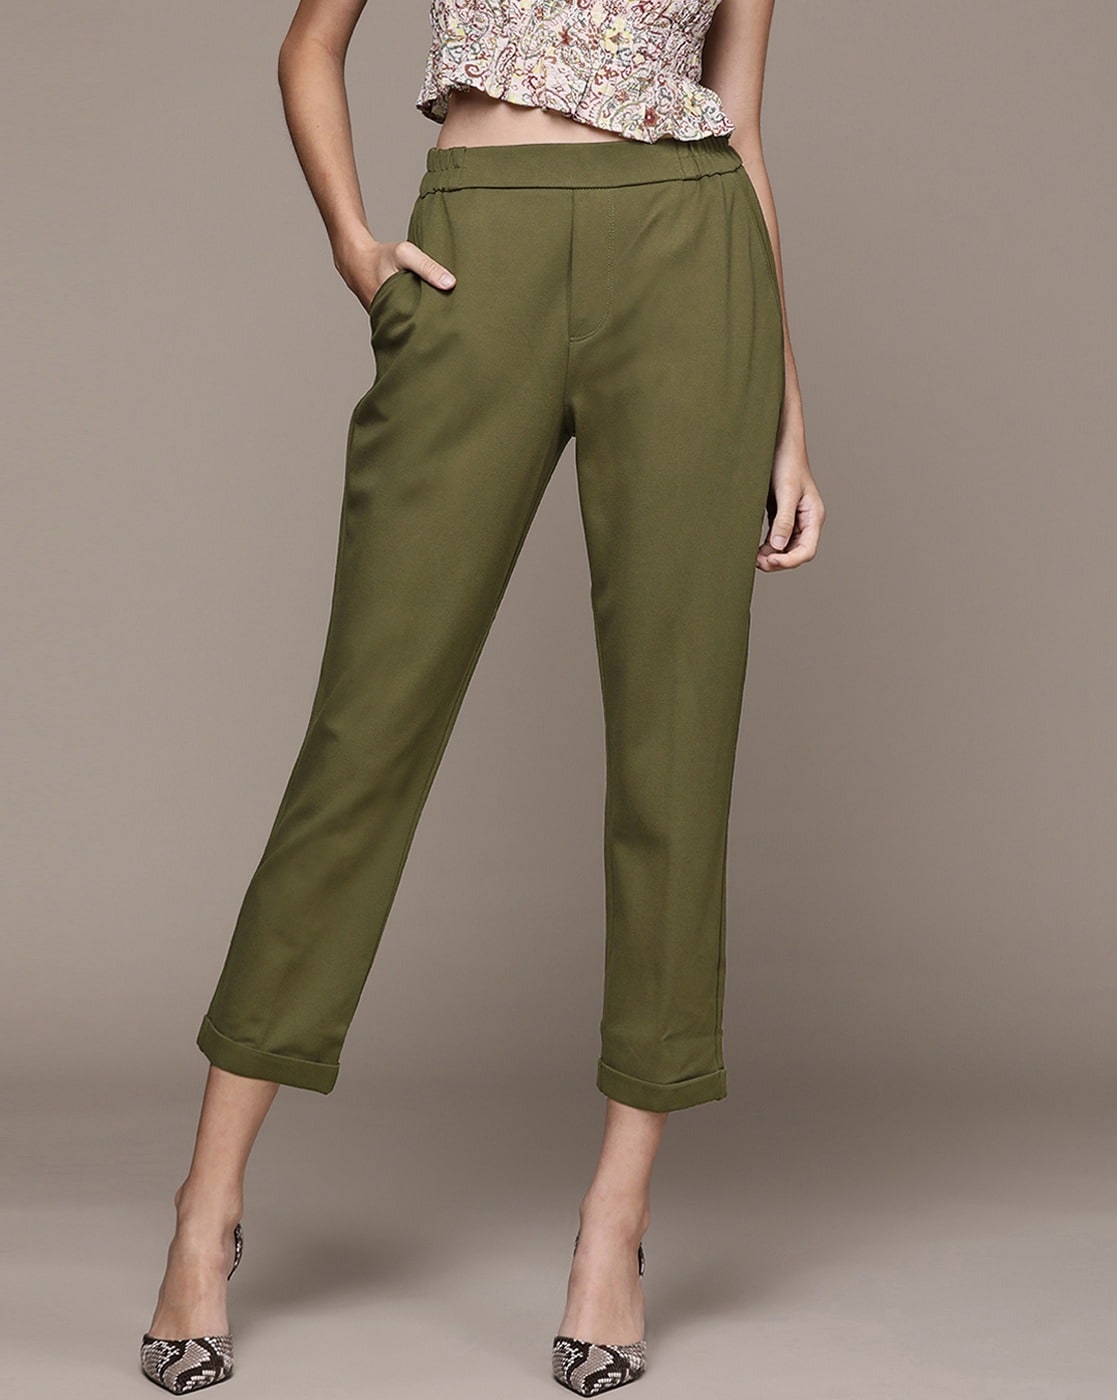 Buy COTTON ON Women Olive Green Straight Fit Solid Peg Trousers  Trousers  for Women 10661680  Myntra